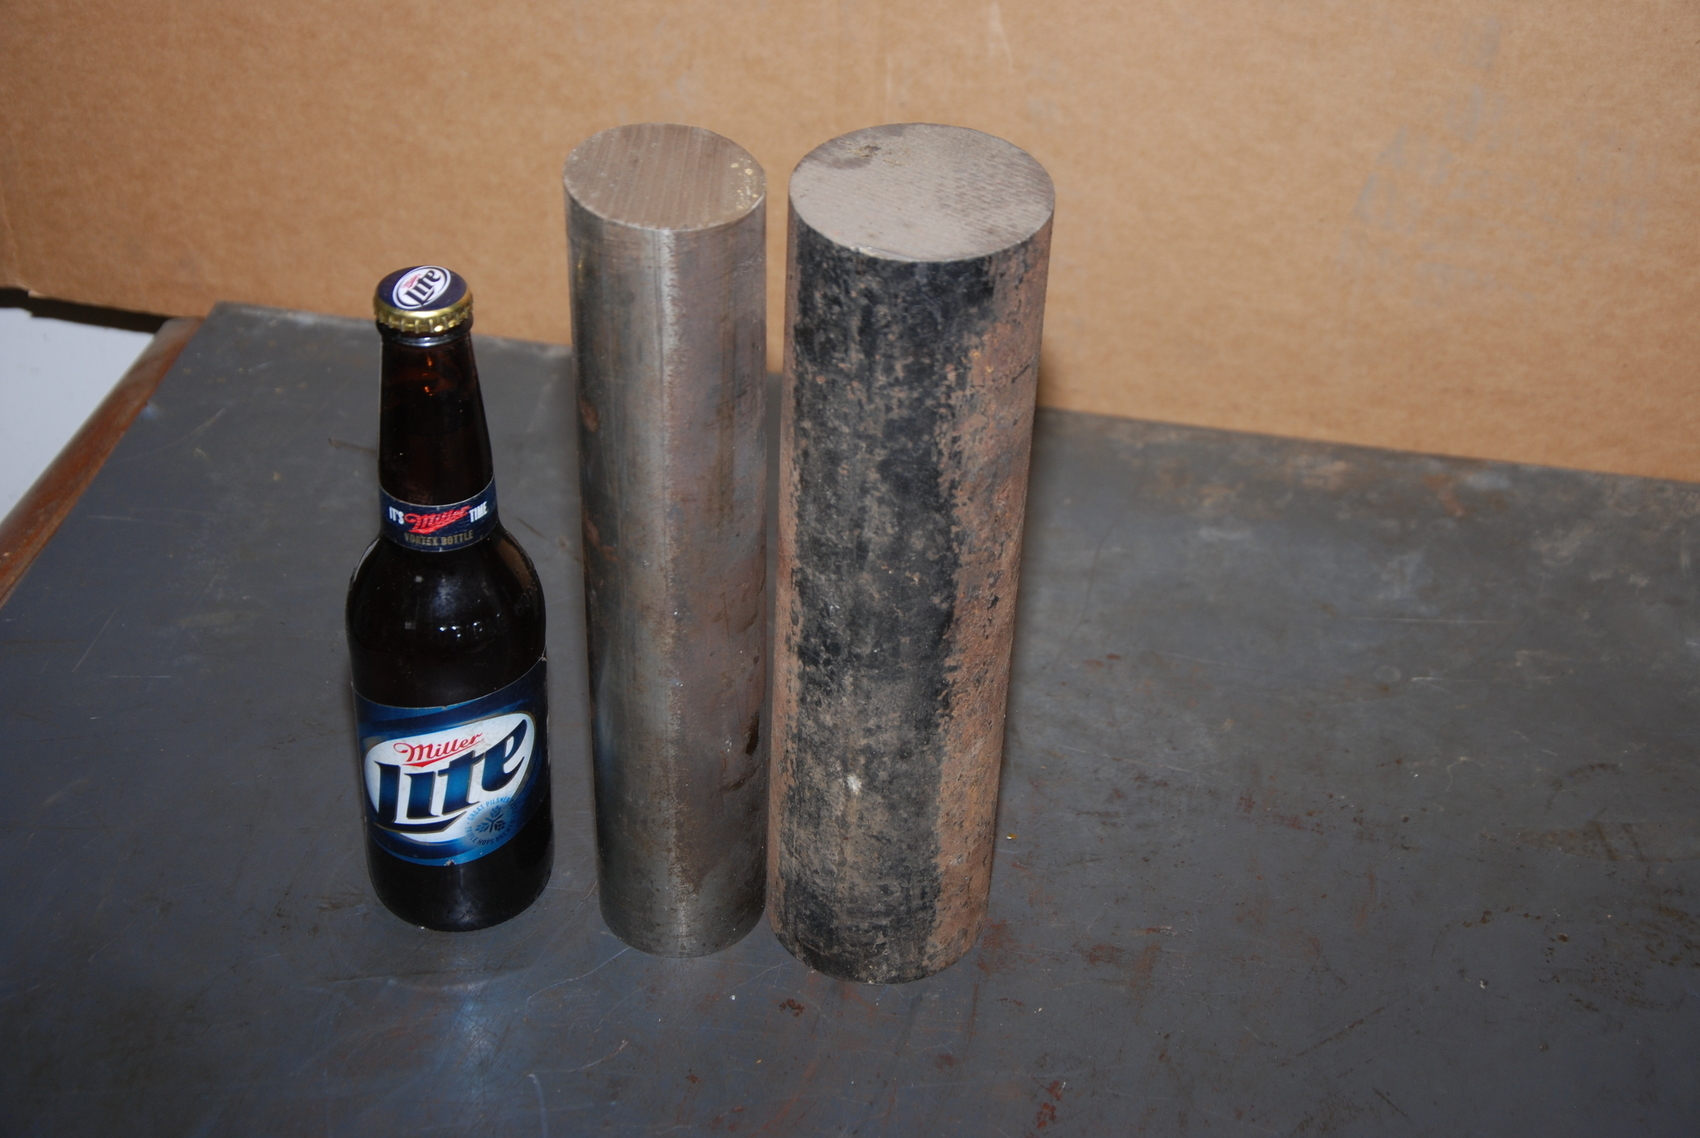 Lot of 2 steel Round Bar for blacksmith anvil,32 lbs